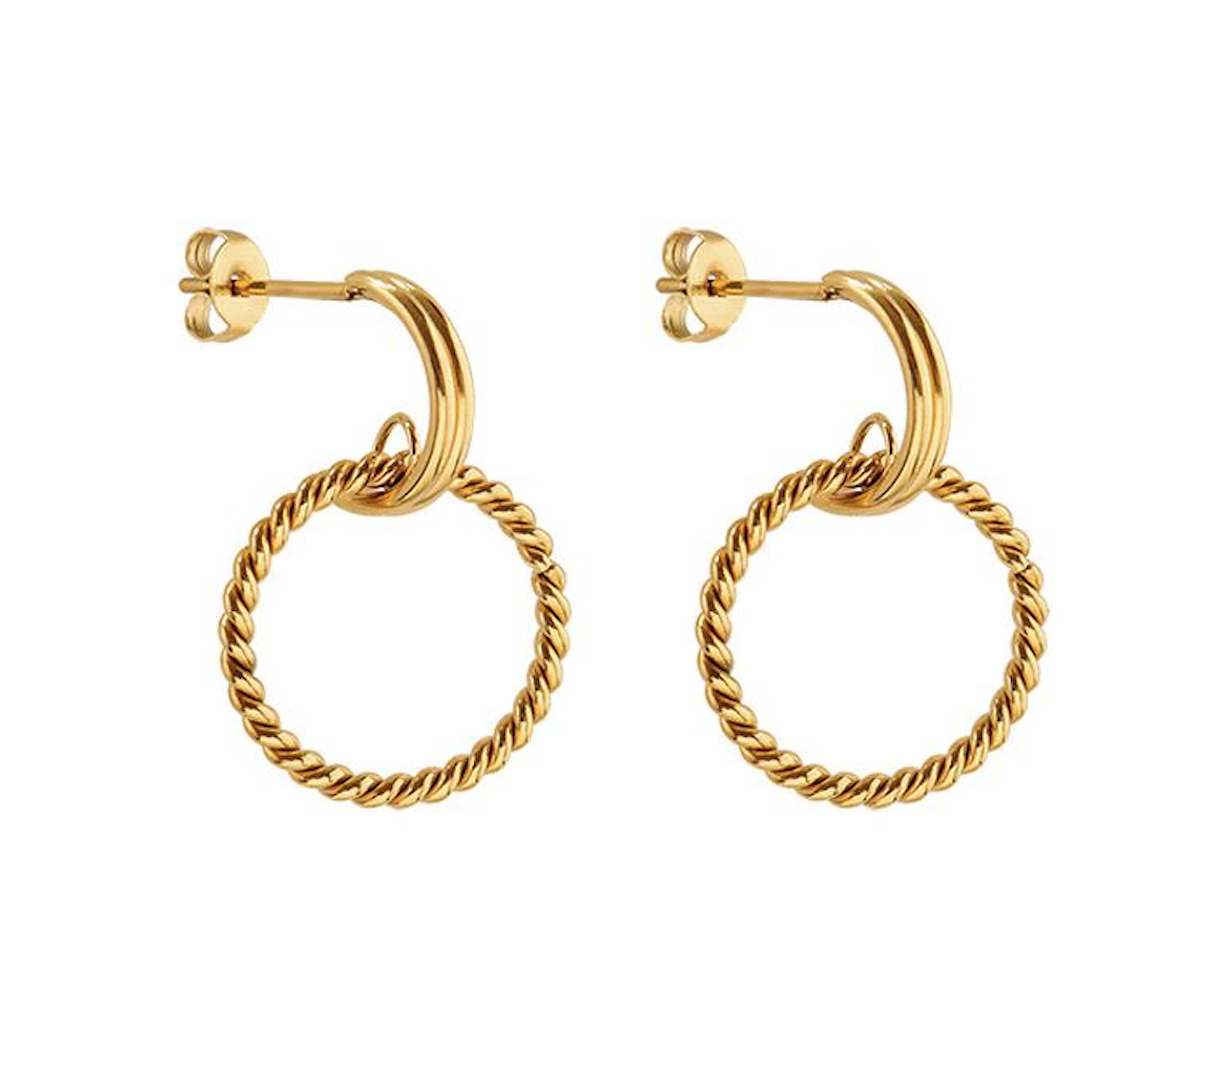 These Earrings Are Like Your Favorite Gold Hoops but With a Twist!